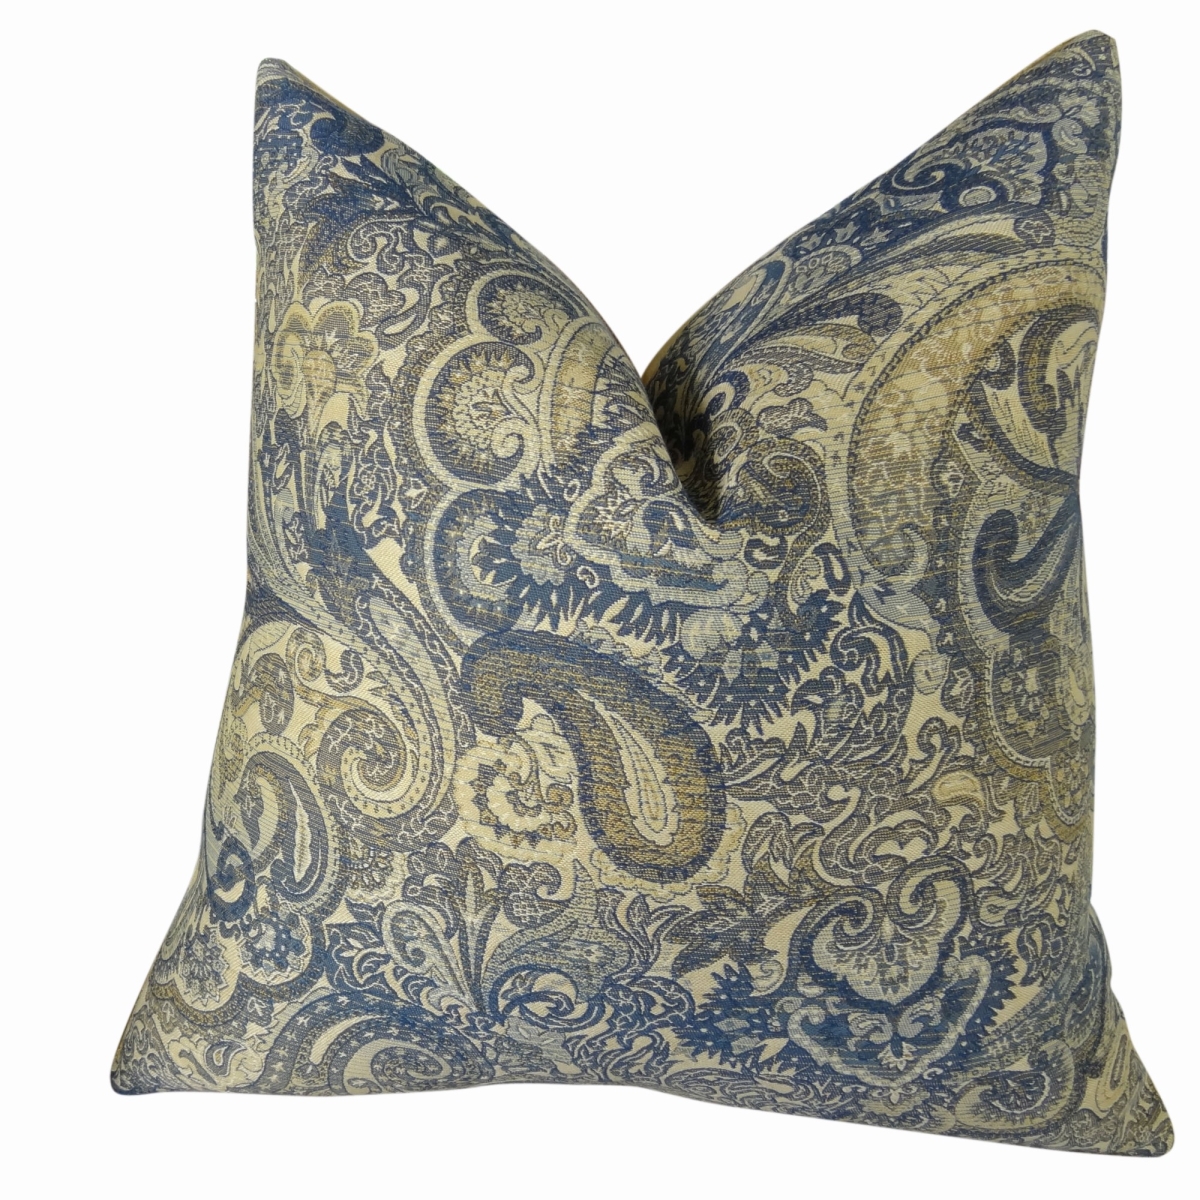 Paciotti Handmade Double Sided Throw Pillow - Navy - Blue & Taupe - 24 x 24 in -  DwellingDesigns, DW3126090